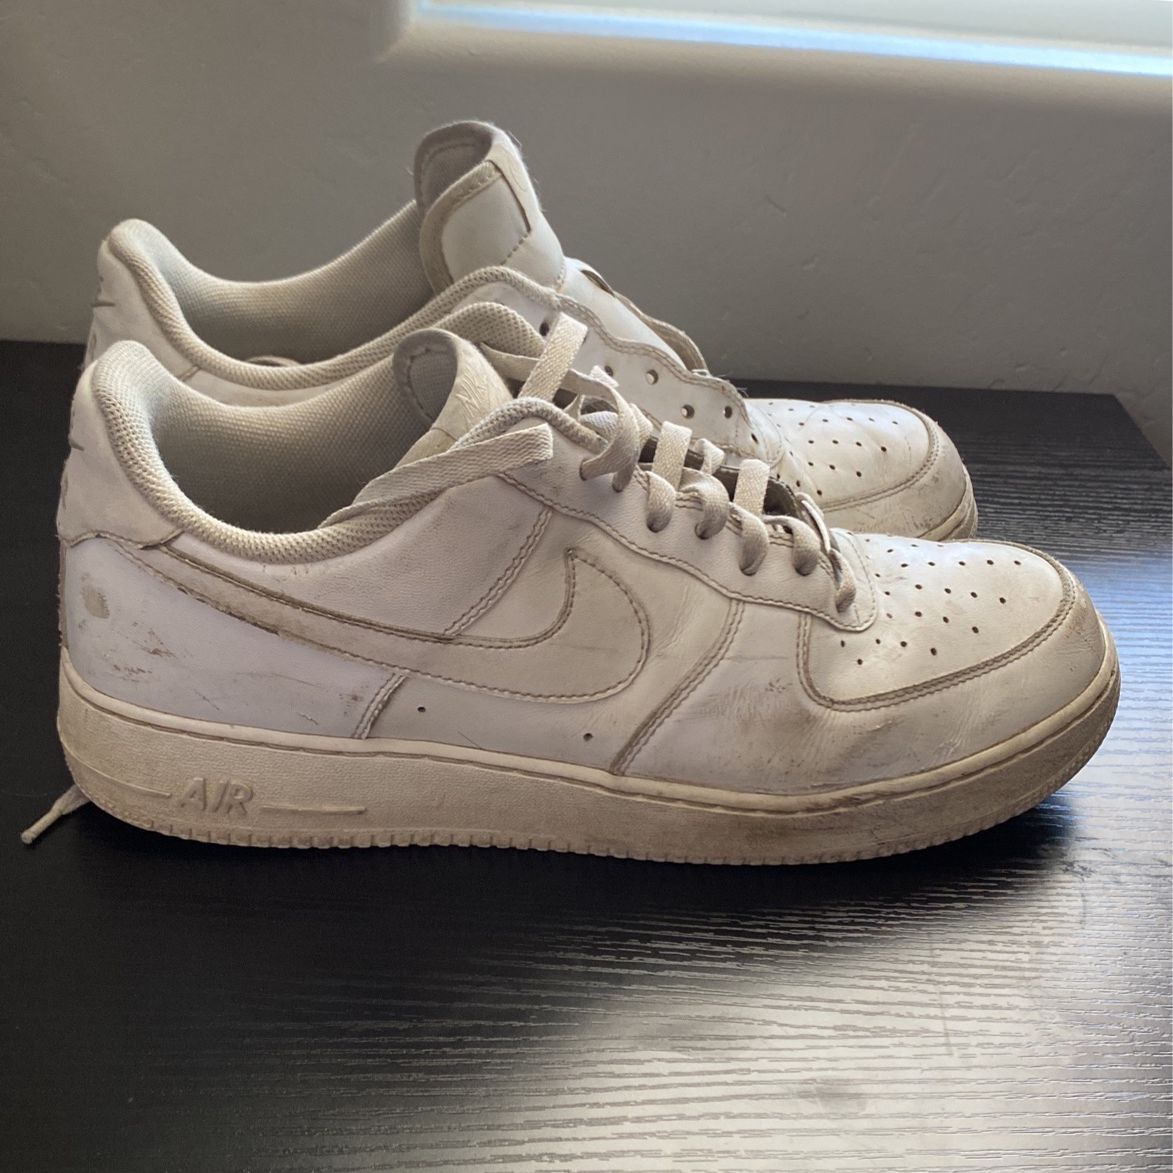 Nike Black Air Force 1 Men Size 12 Like New With Box for Sale in  Bakersfield, CA - OfferUp